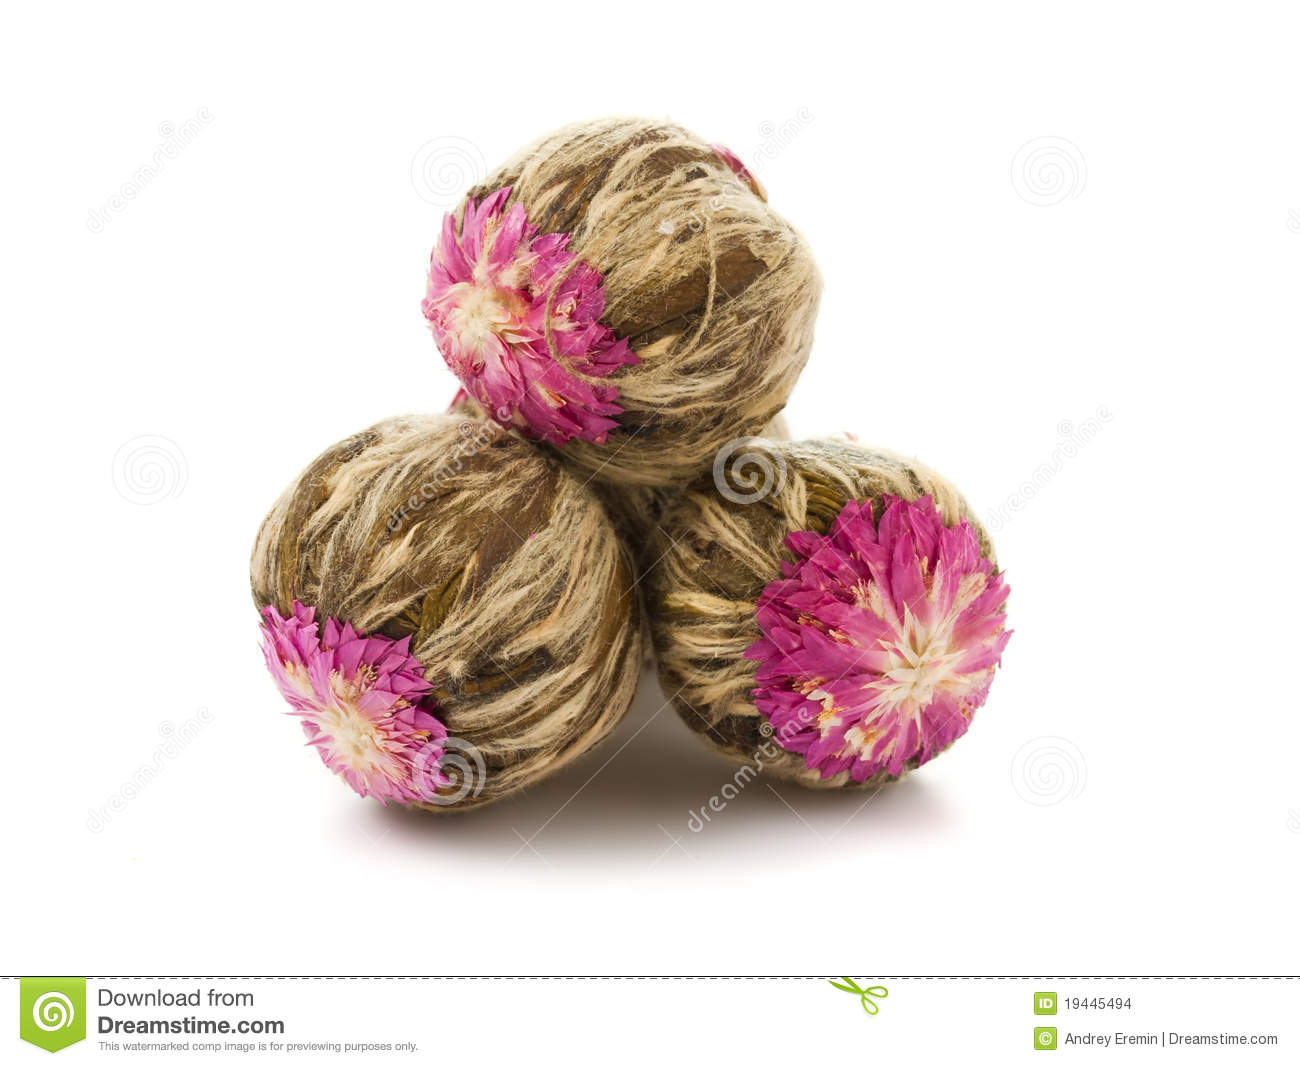 Chinese Blooming Flower Green Tea Balls Stock Images   Image  19445494